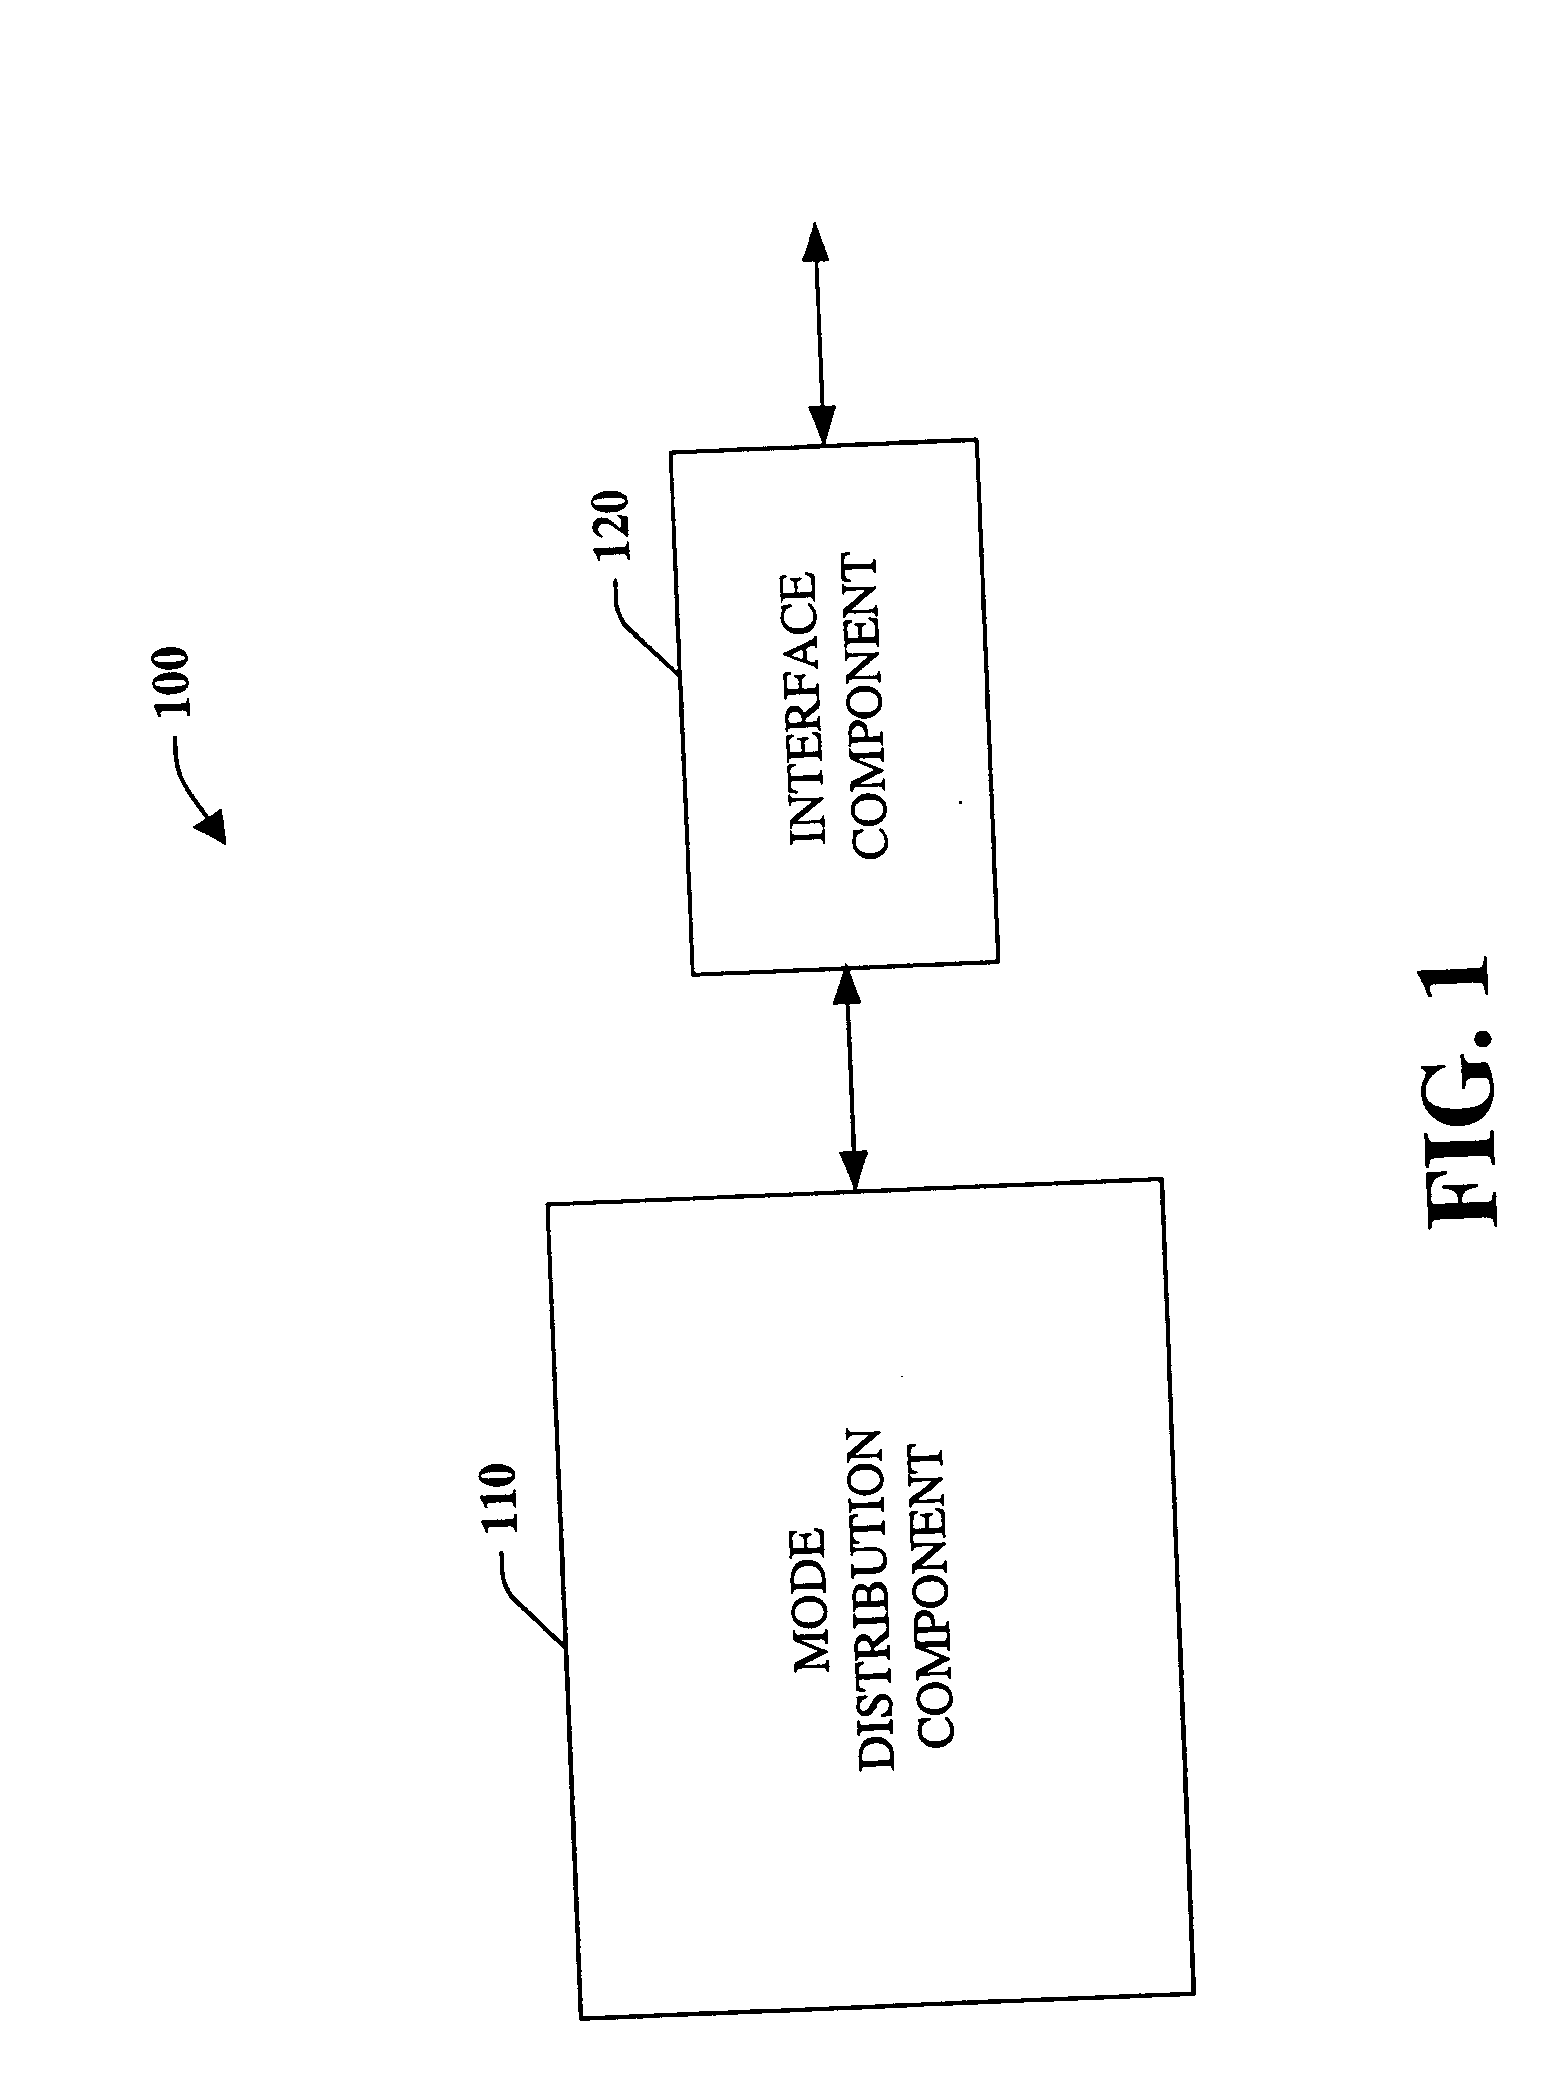 Systems and methods that provide modes of access for a phone